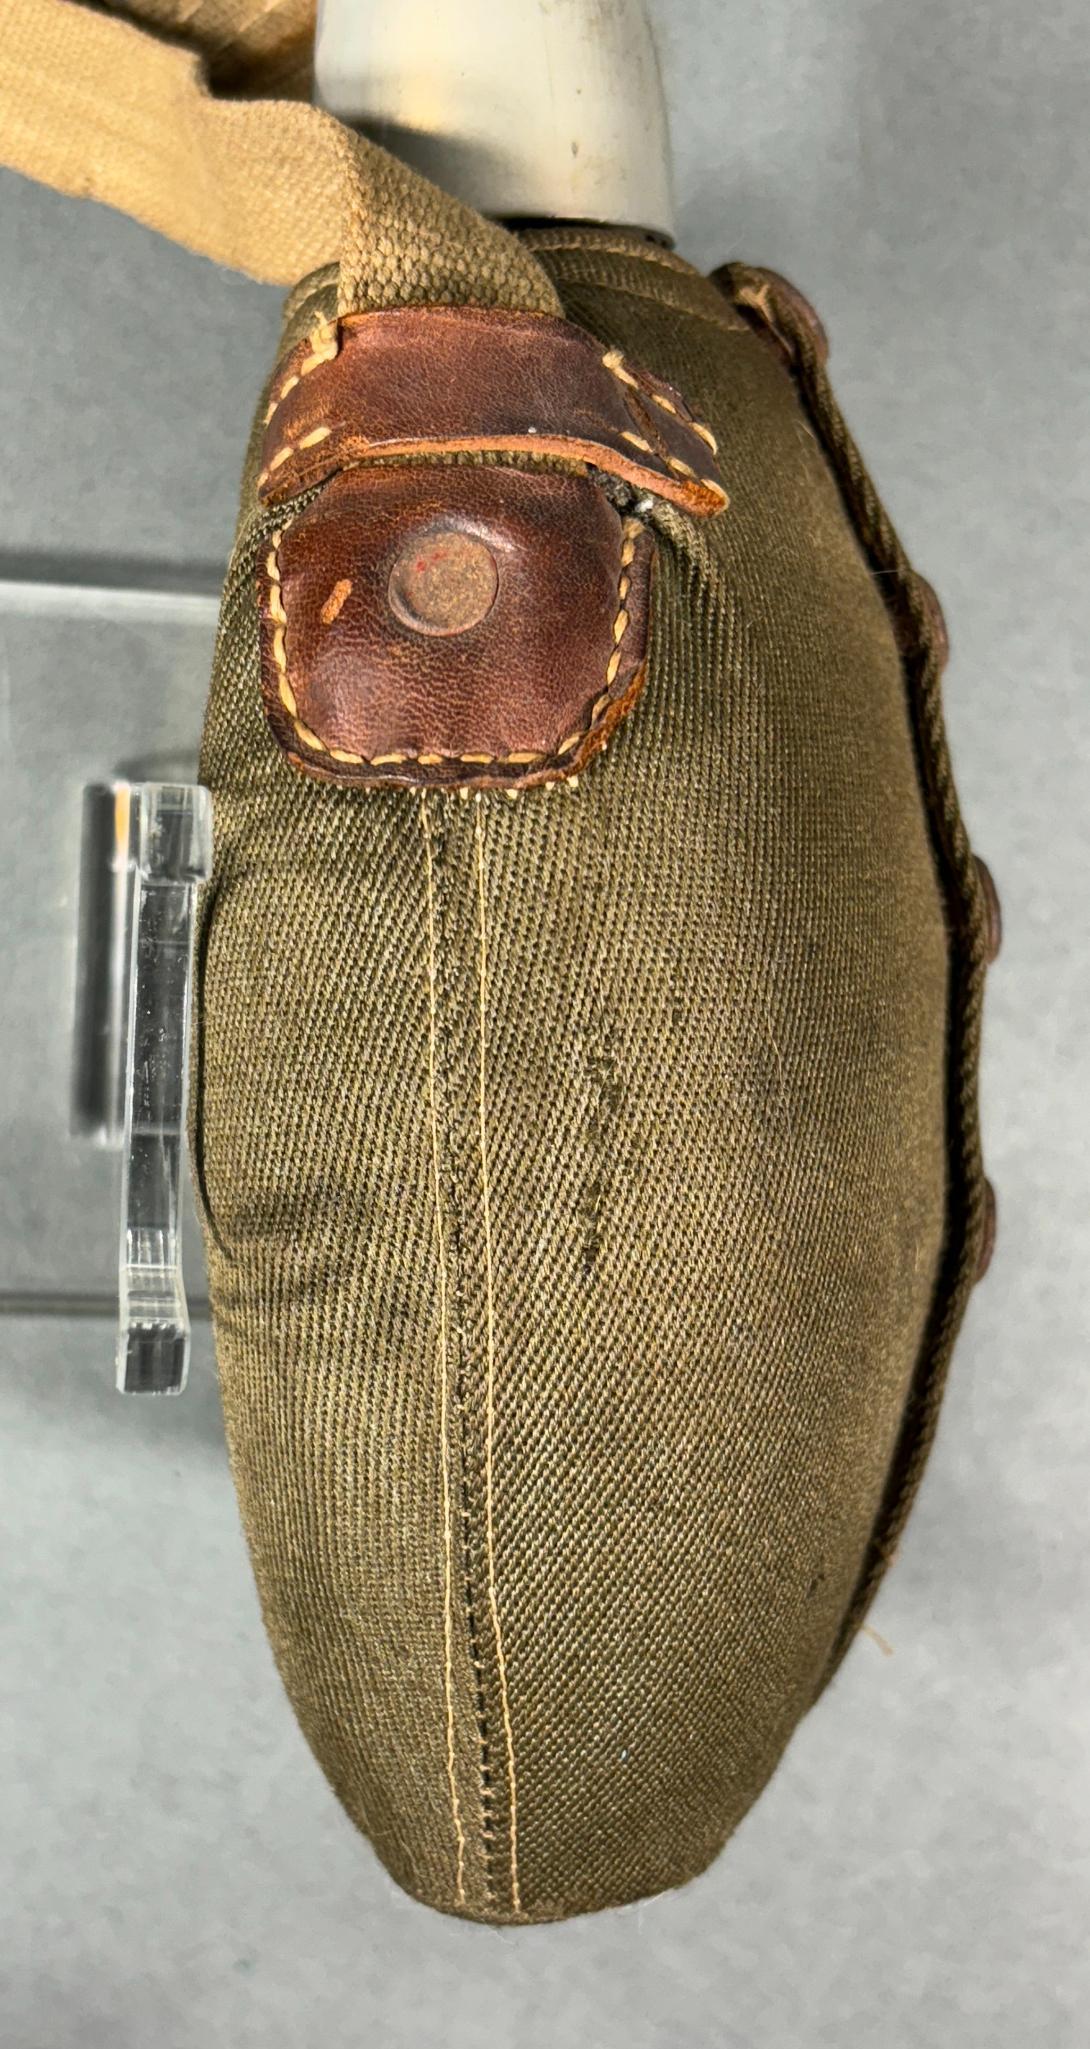 WWII IMPERIAL JAPANESE ARMY OFFICER CANTEEN